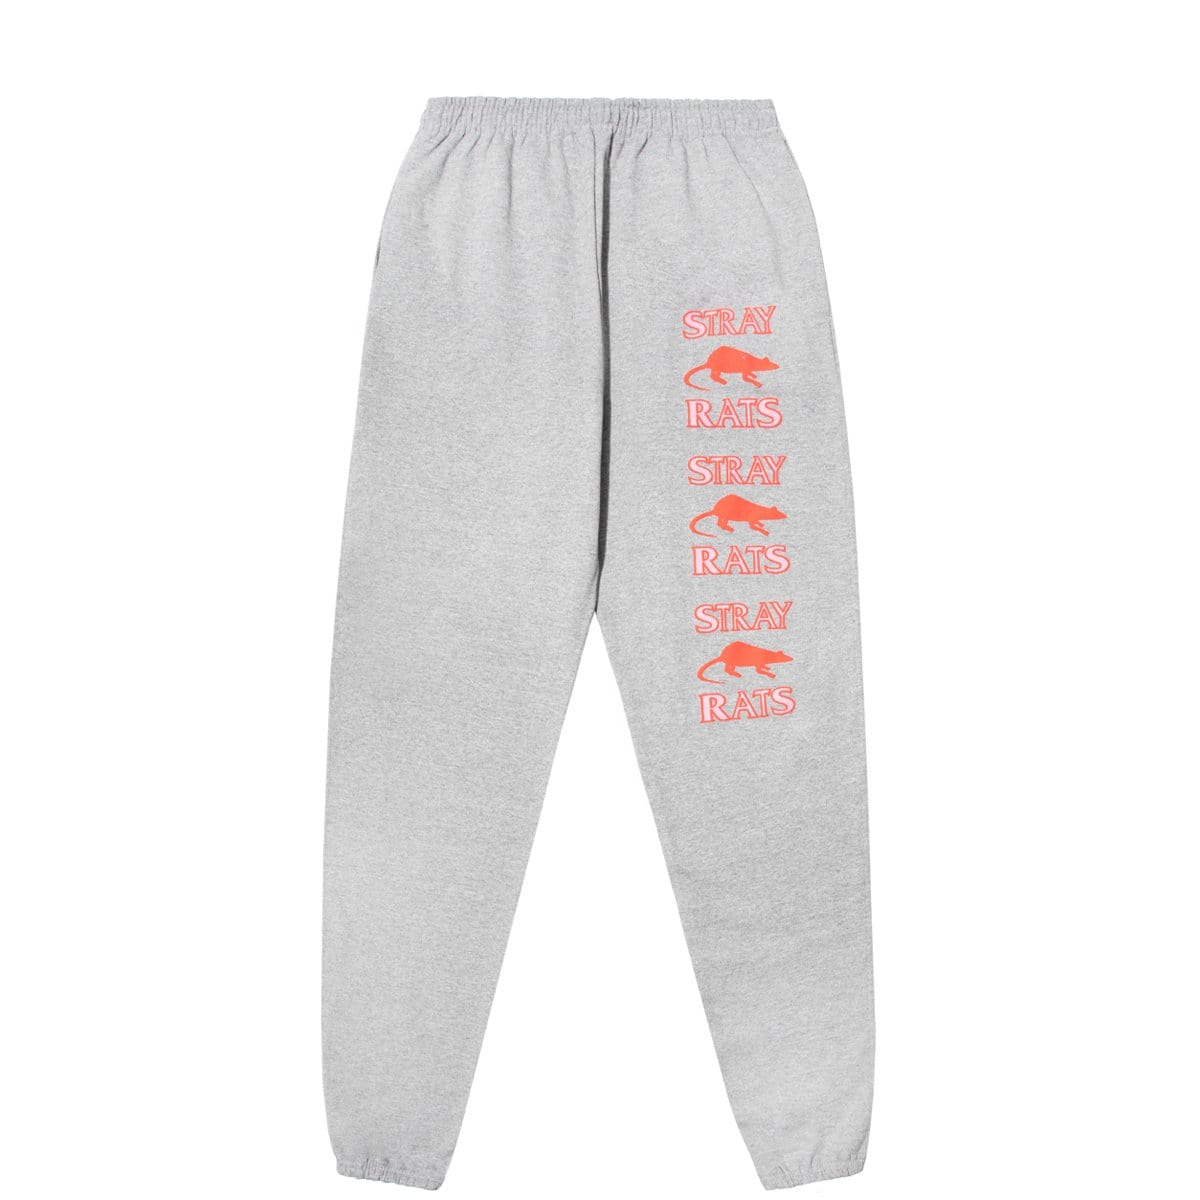 Stray Rats Bottoms RODENTICIDE SWEATPANTS